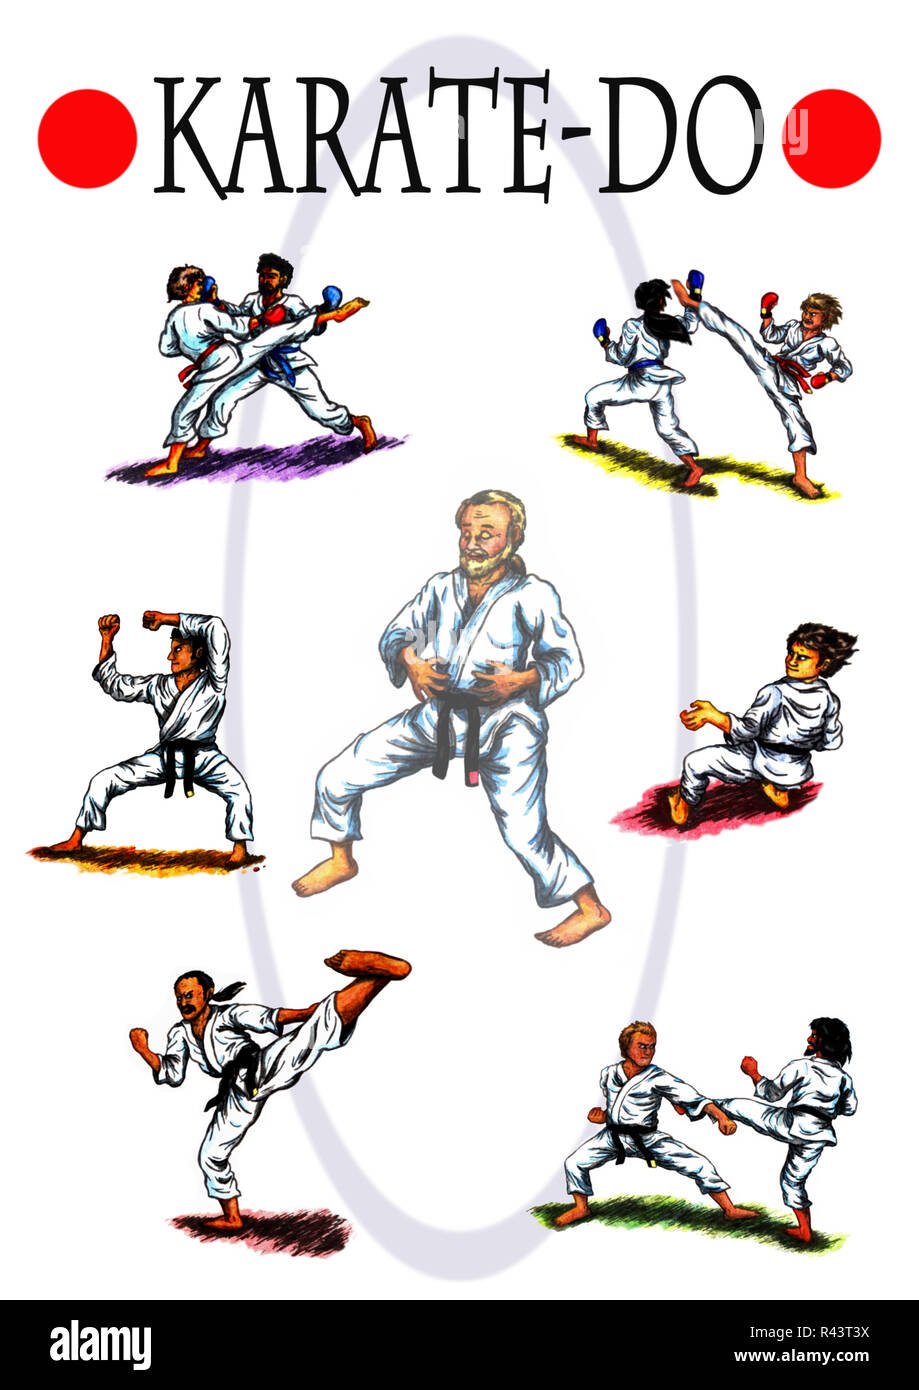 the diversity of karate do which shows breathing exercises, tournament  fights, basics, techniques and katas Stock Photo - Alamy